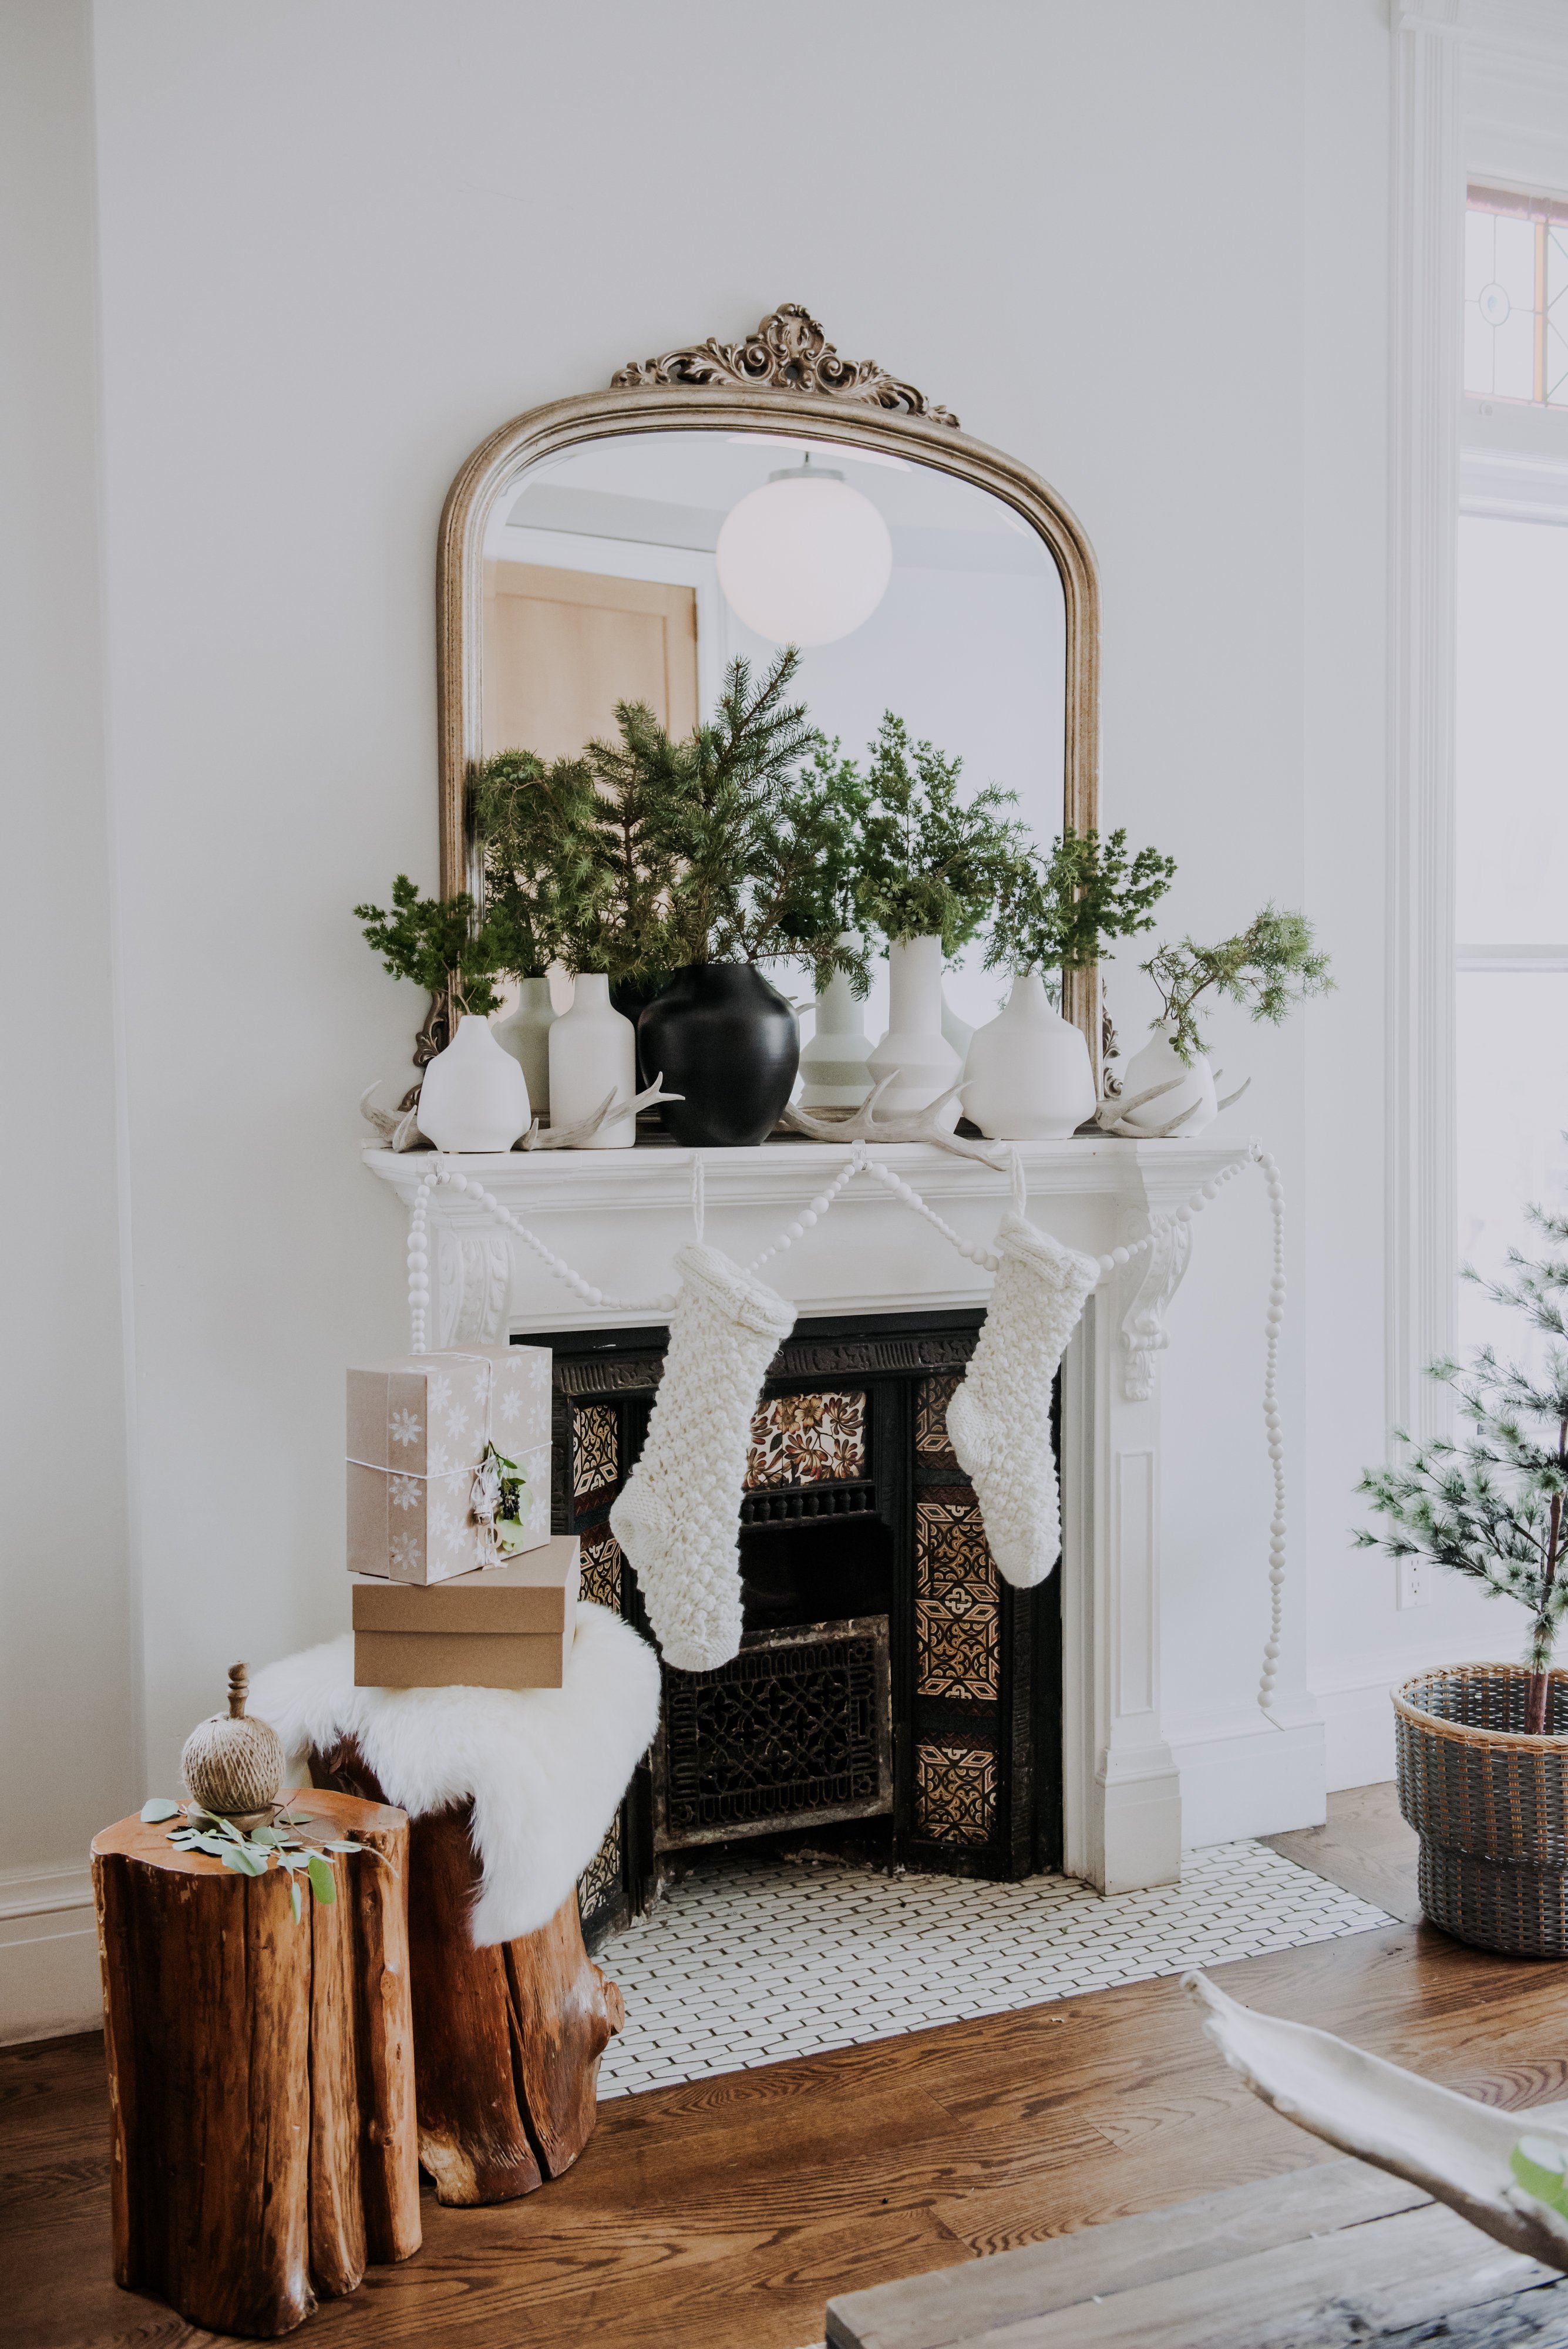 The fireplace mantle at Peter Pan Bistro is styled with giant white stockings, white ceramic plant holders of different shapes and sizes all containing pine branches and a single black plant holder as part of Reitmans' Holiday Brand Activation Brunch styled by Olive Studio. 